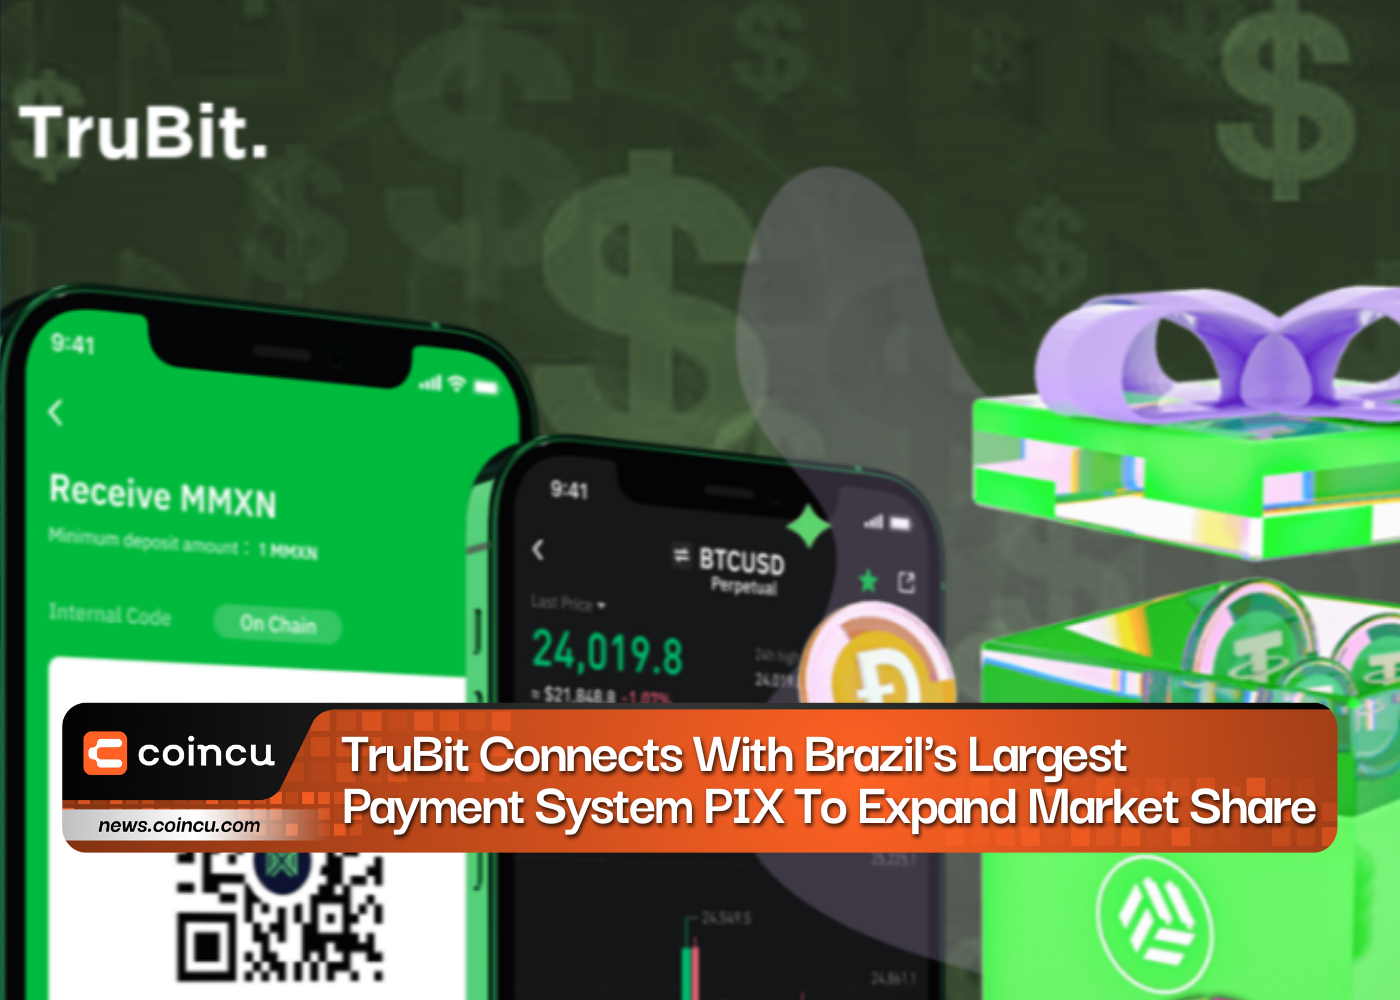 TruBit Connects With Brazil's Largest Payment System PIX To Expand Market Share